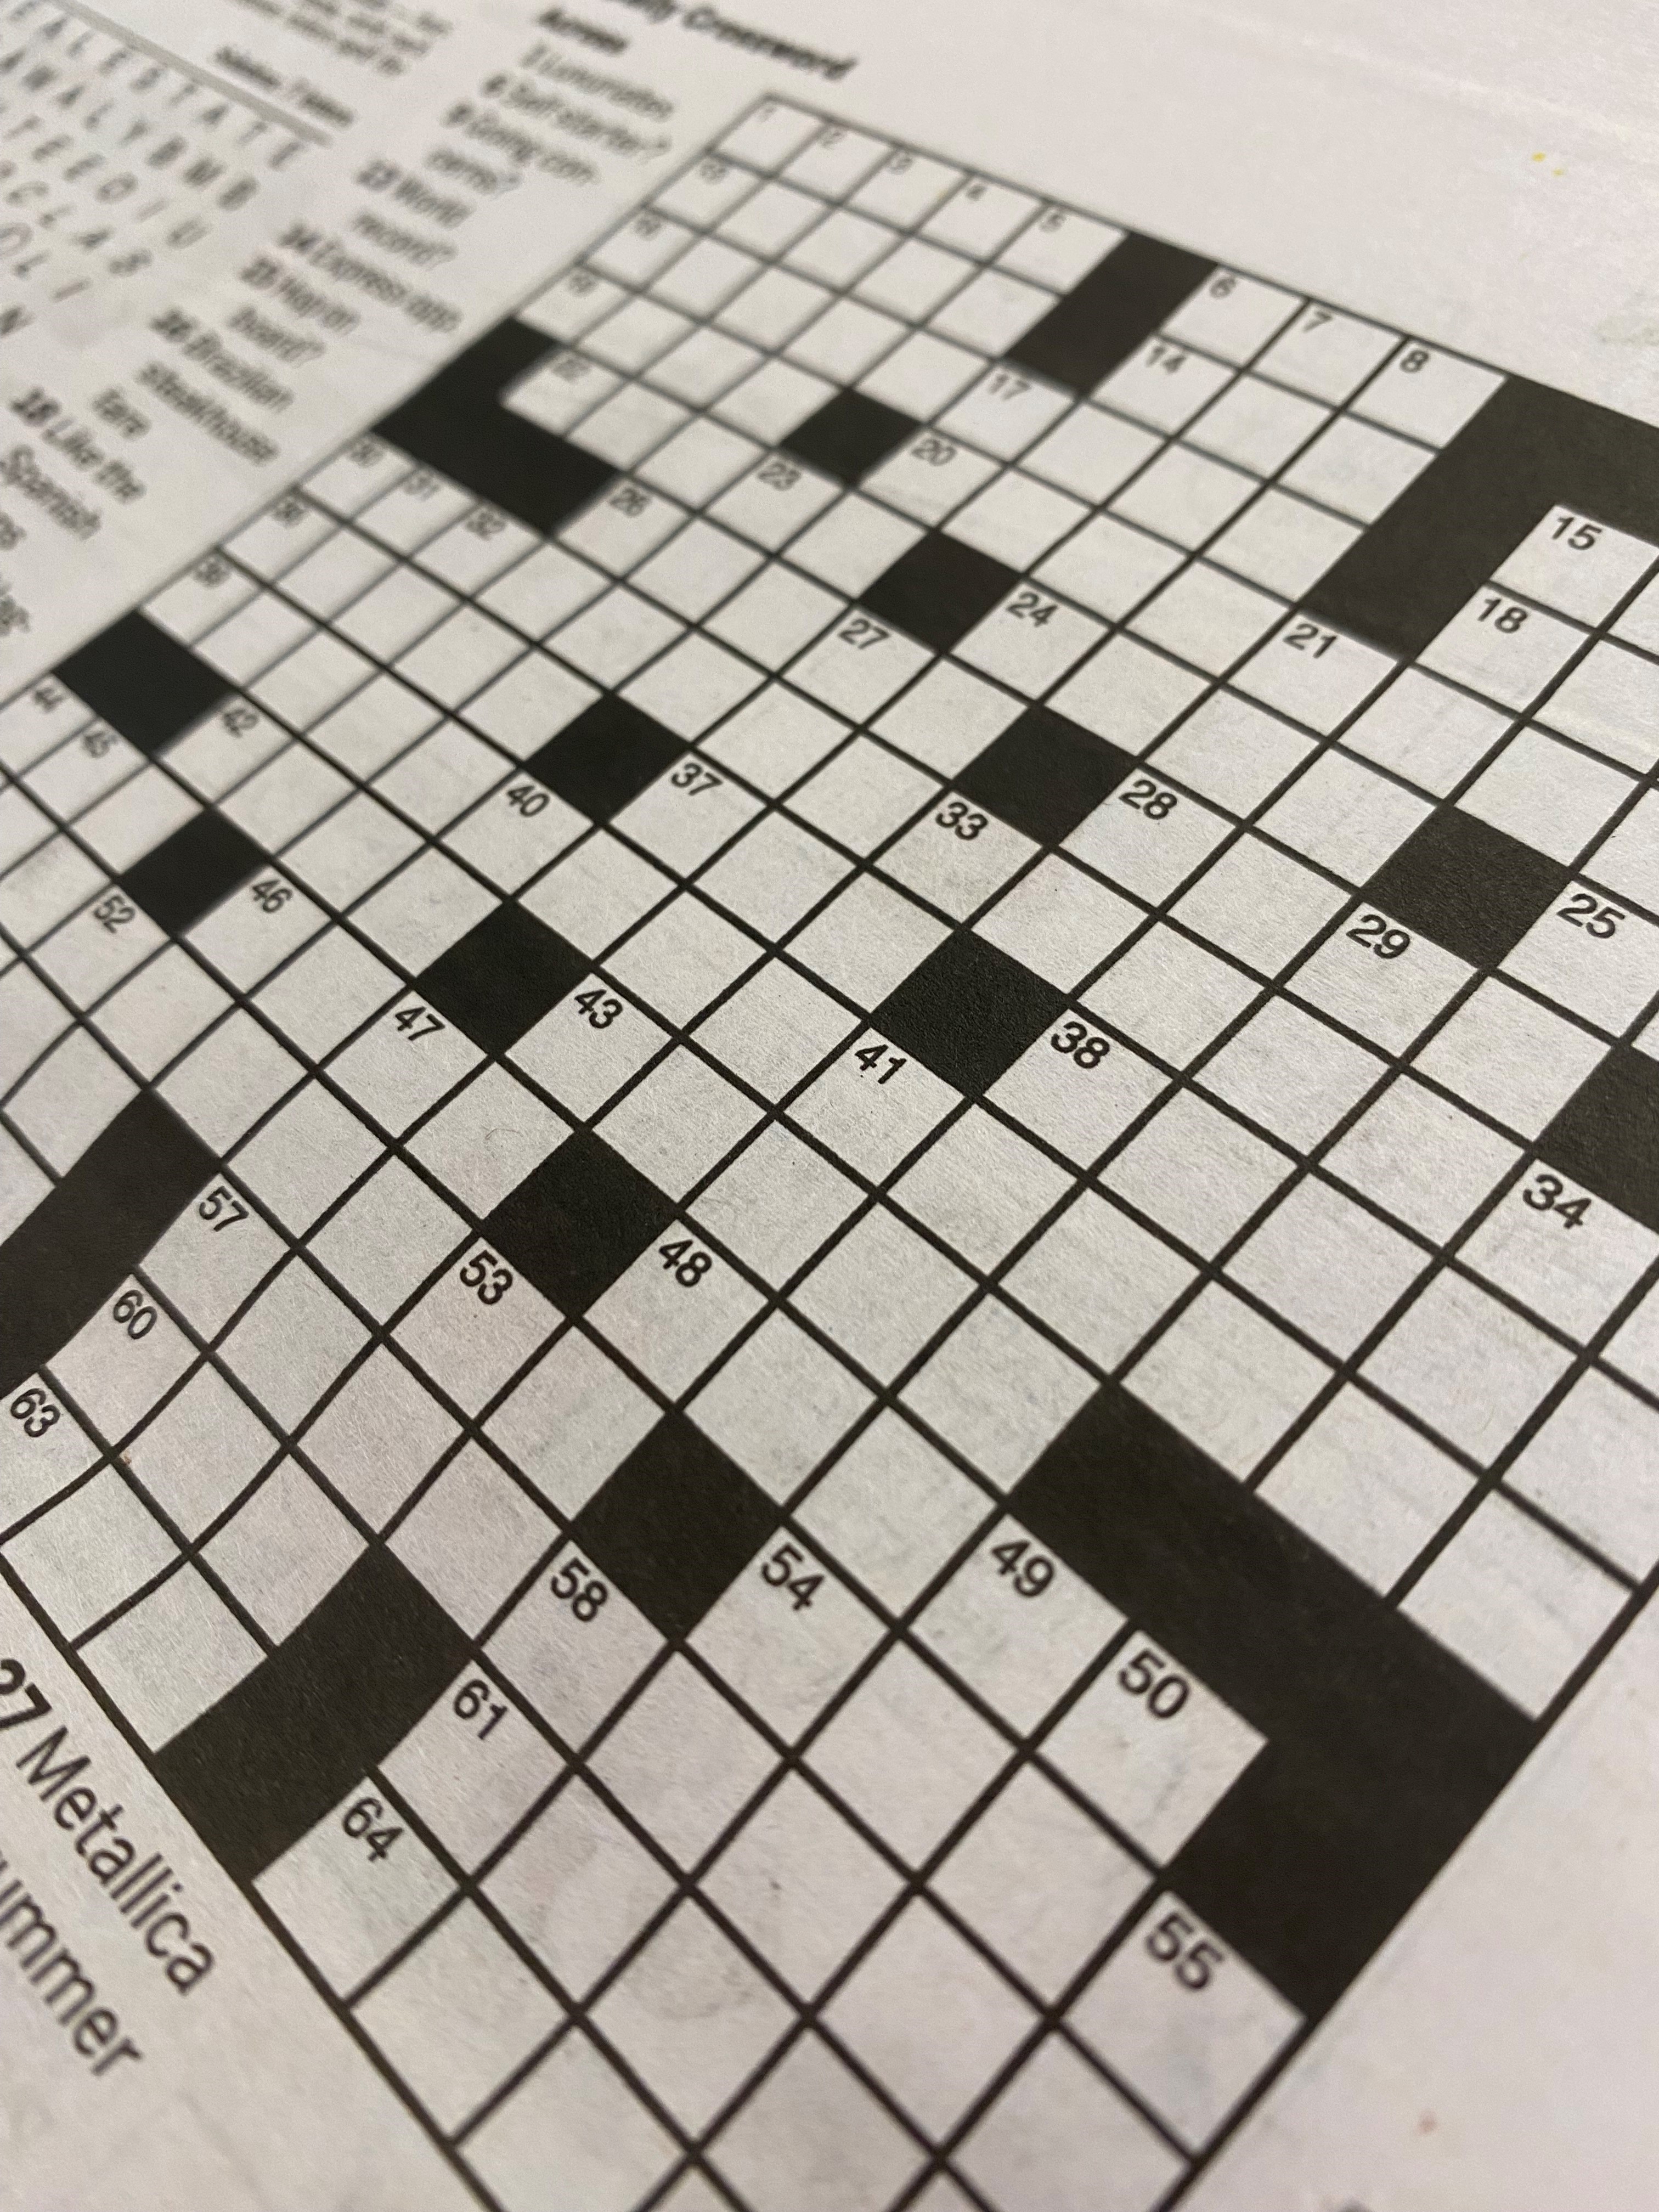 New Yorker Crossword Constructors on the Best Games to Play While